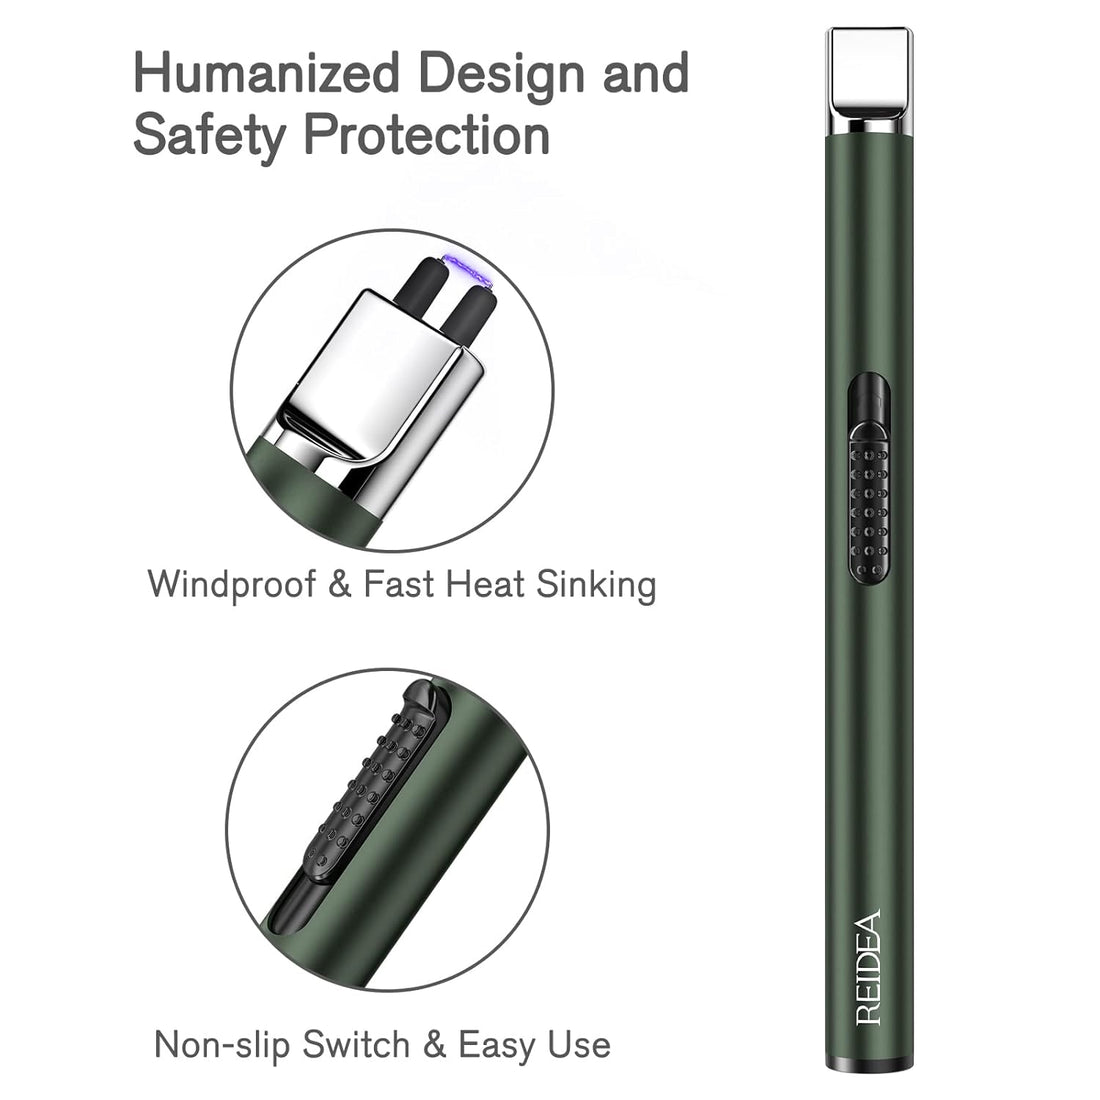 REIDEA Lighter S4 Electric Candle Lighter USB Rechargeable with Safety Switch, Flameless Portable Fast Heat Windproof Plasma Lighters, Perfect for Home Cooking BBQ Camping Fireworks, Pine Green